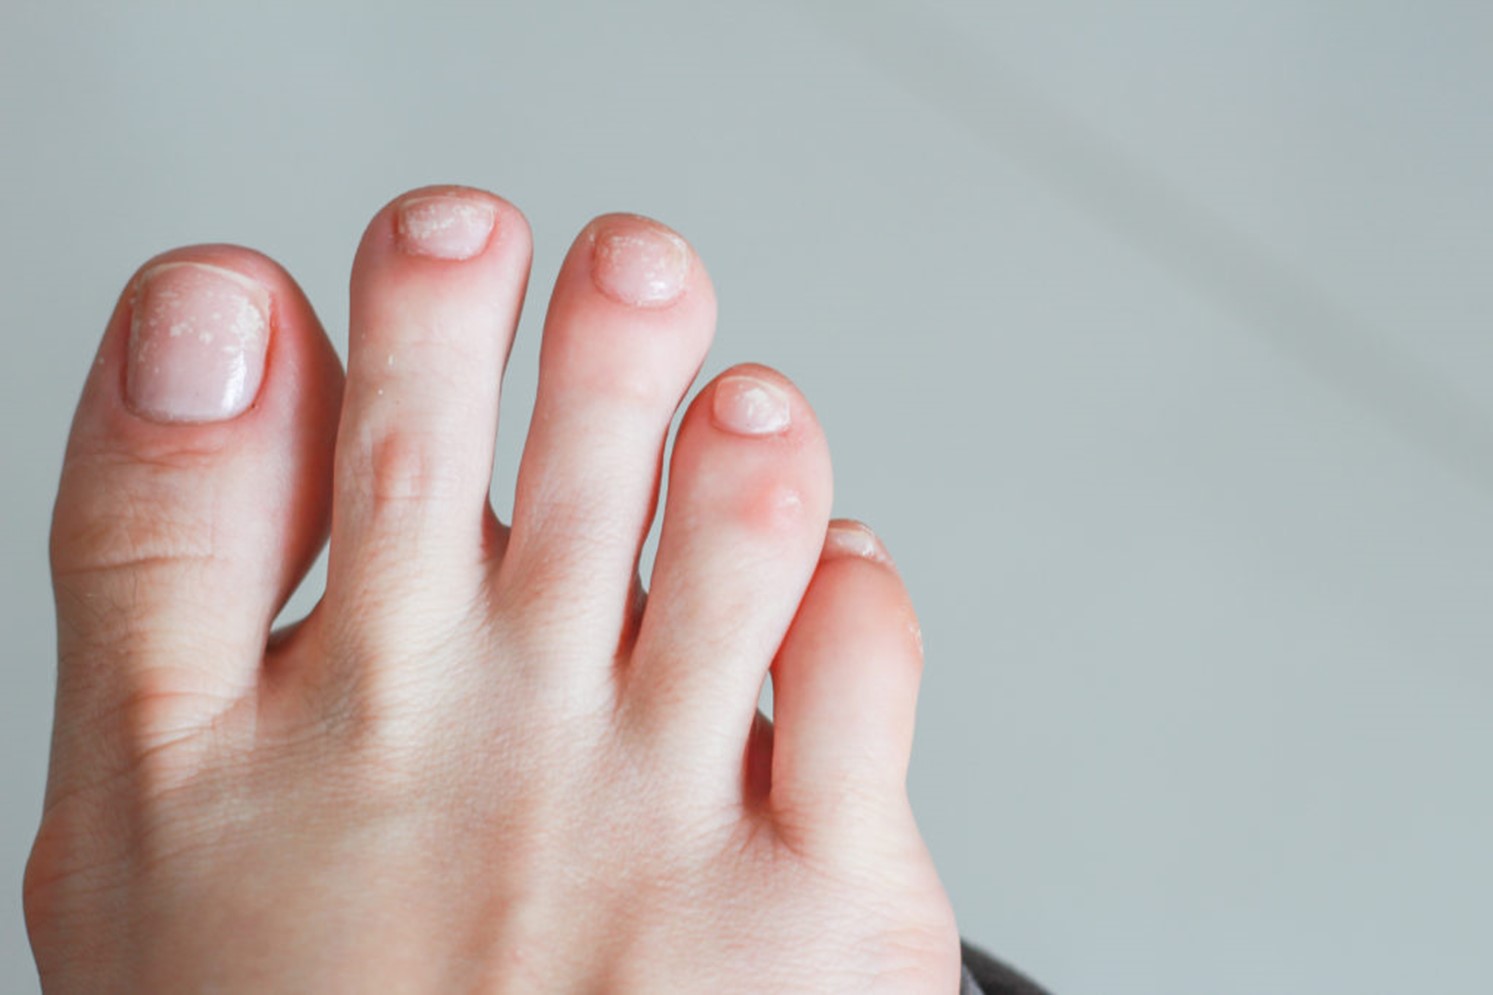 How to Identify and Address Your Toenail Problems - The Foot Doc™